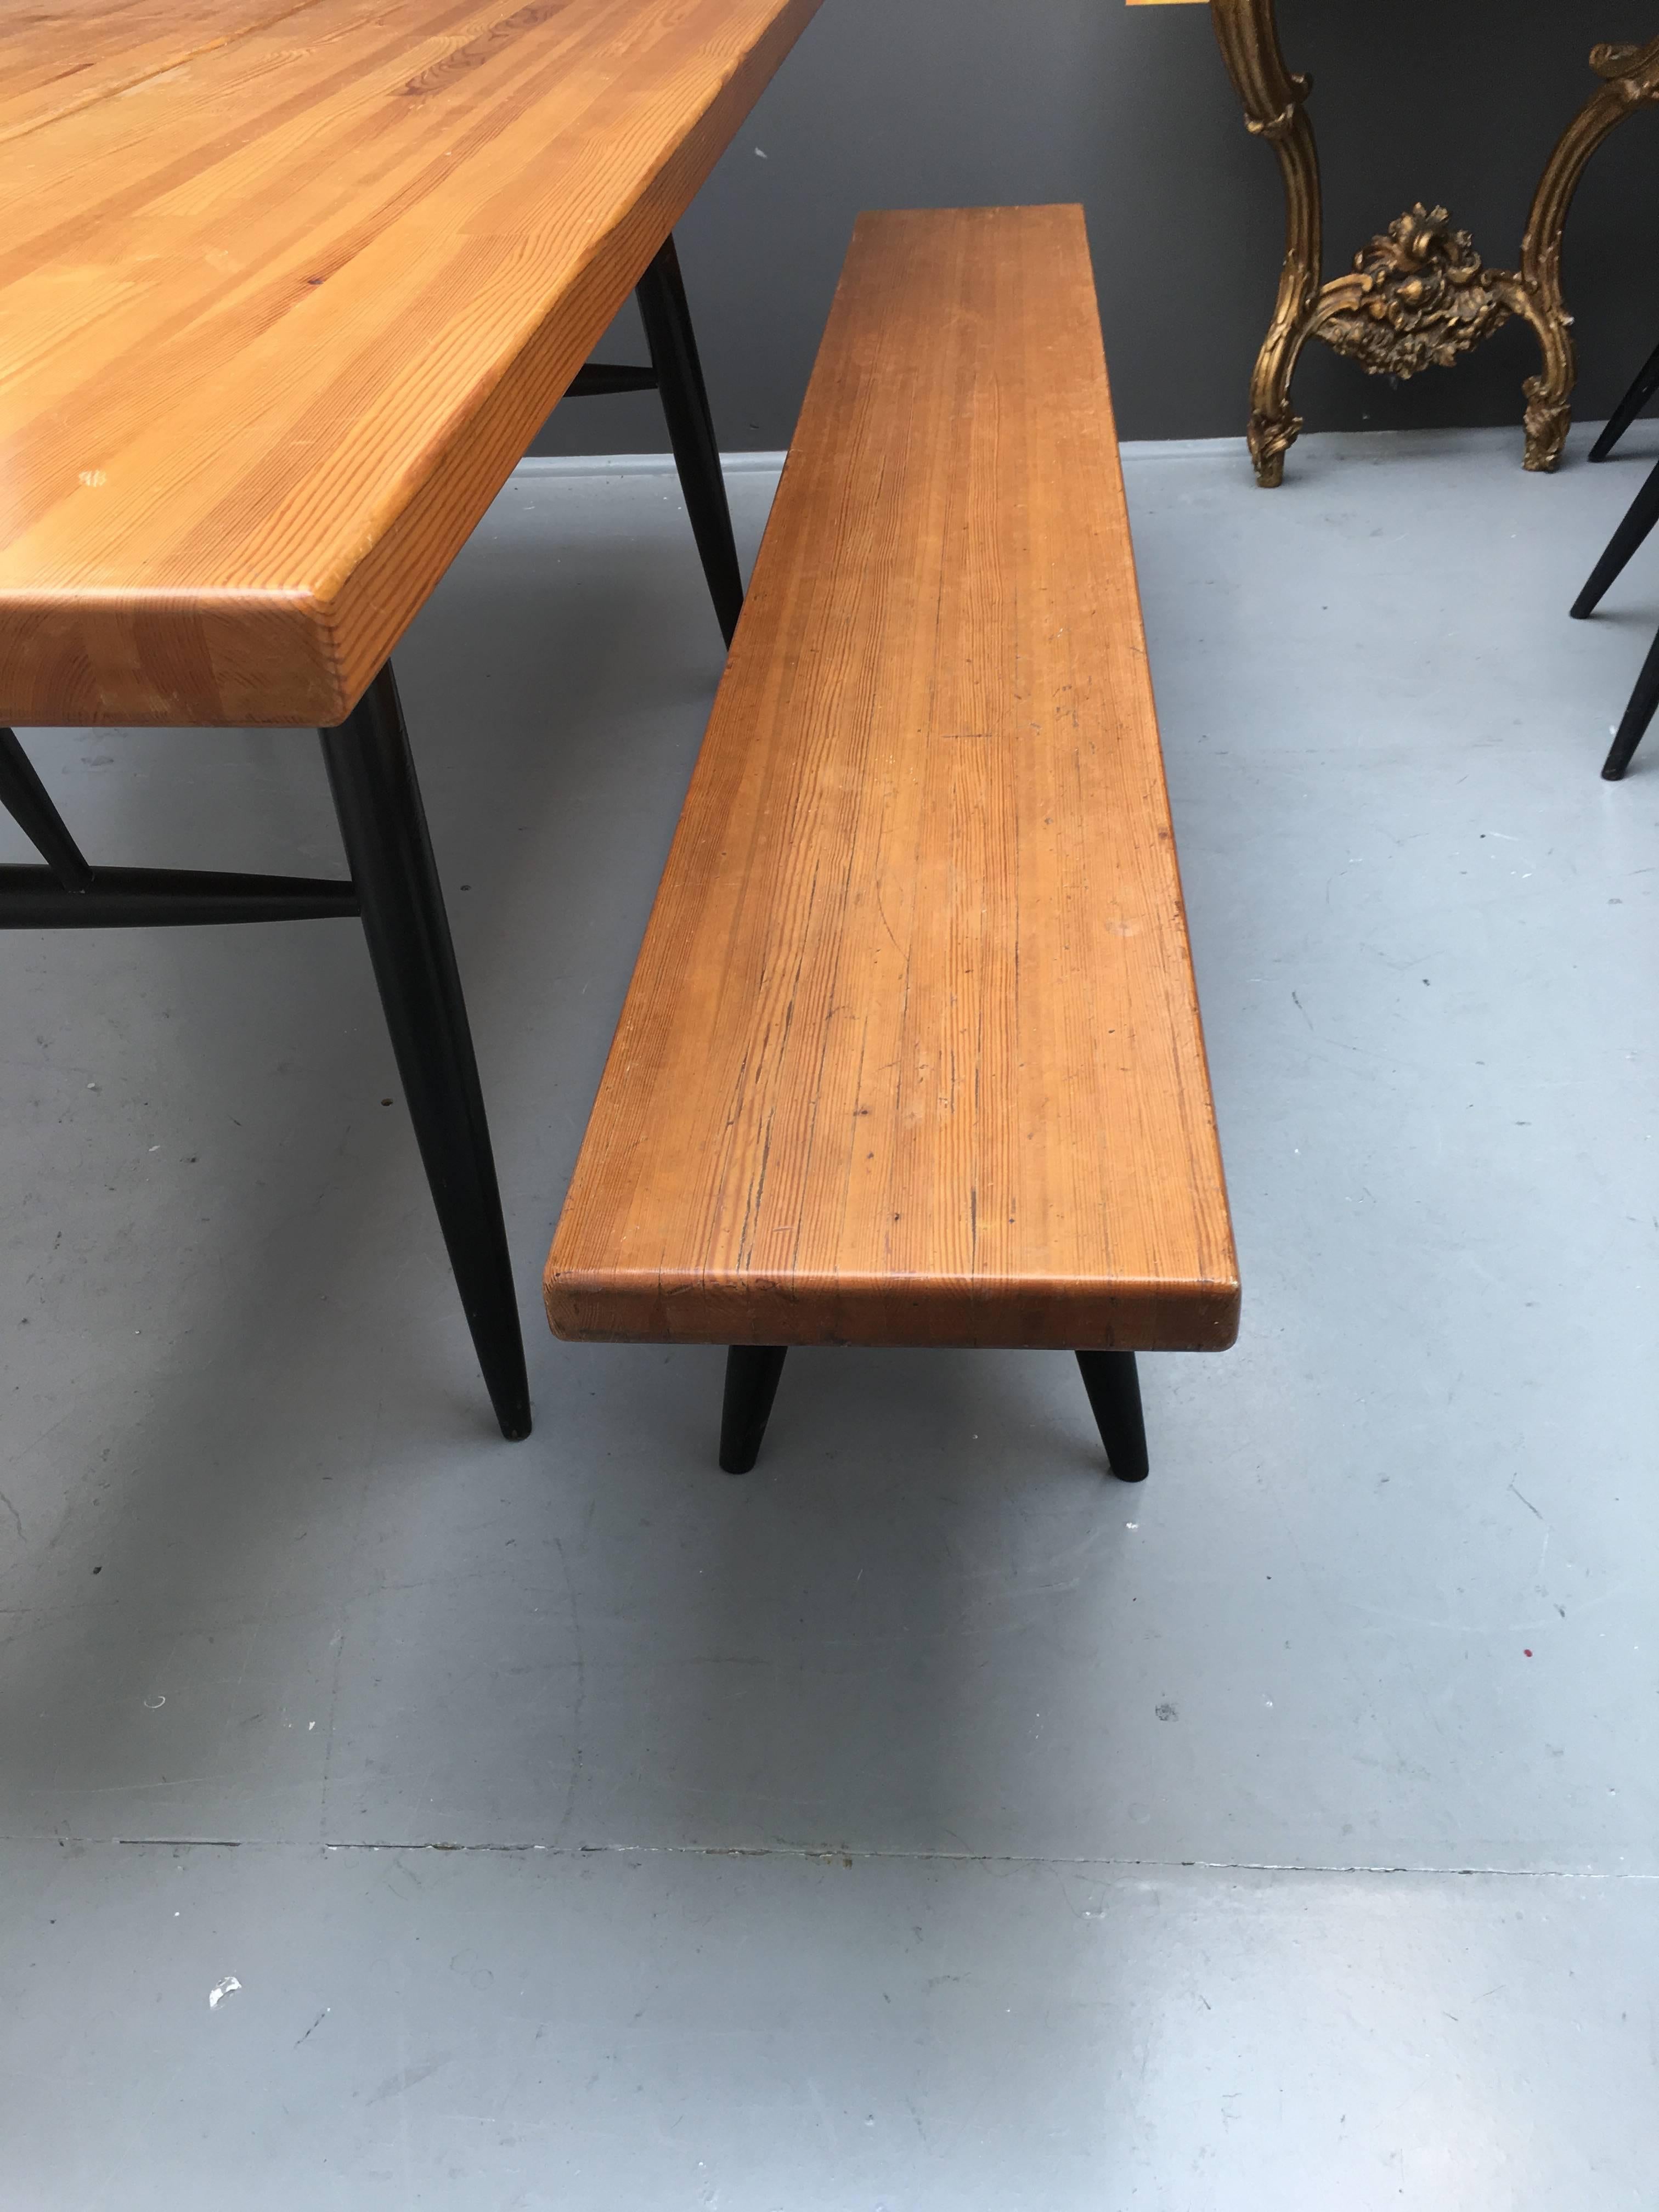 Rare Ilmari Tapiovaara bench. Pirkka design. Finnish, circa 1955 by Asko

Great design, ebonized legs and works well either with a matching table, end of a bed, a window or a hall bench

 